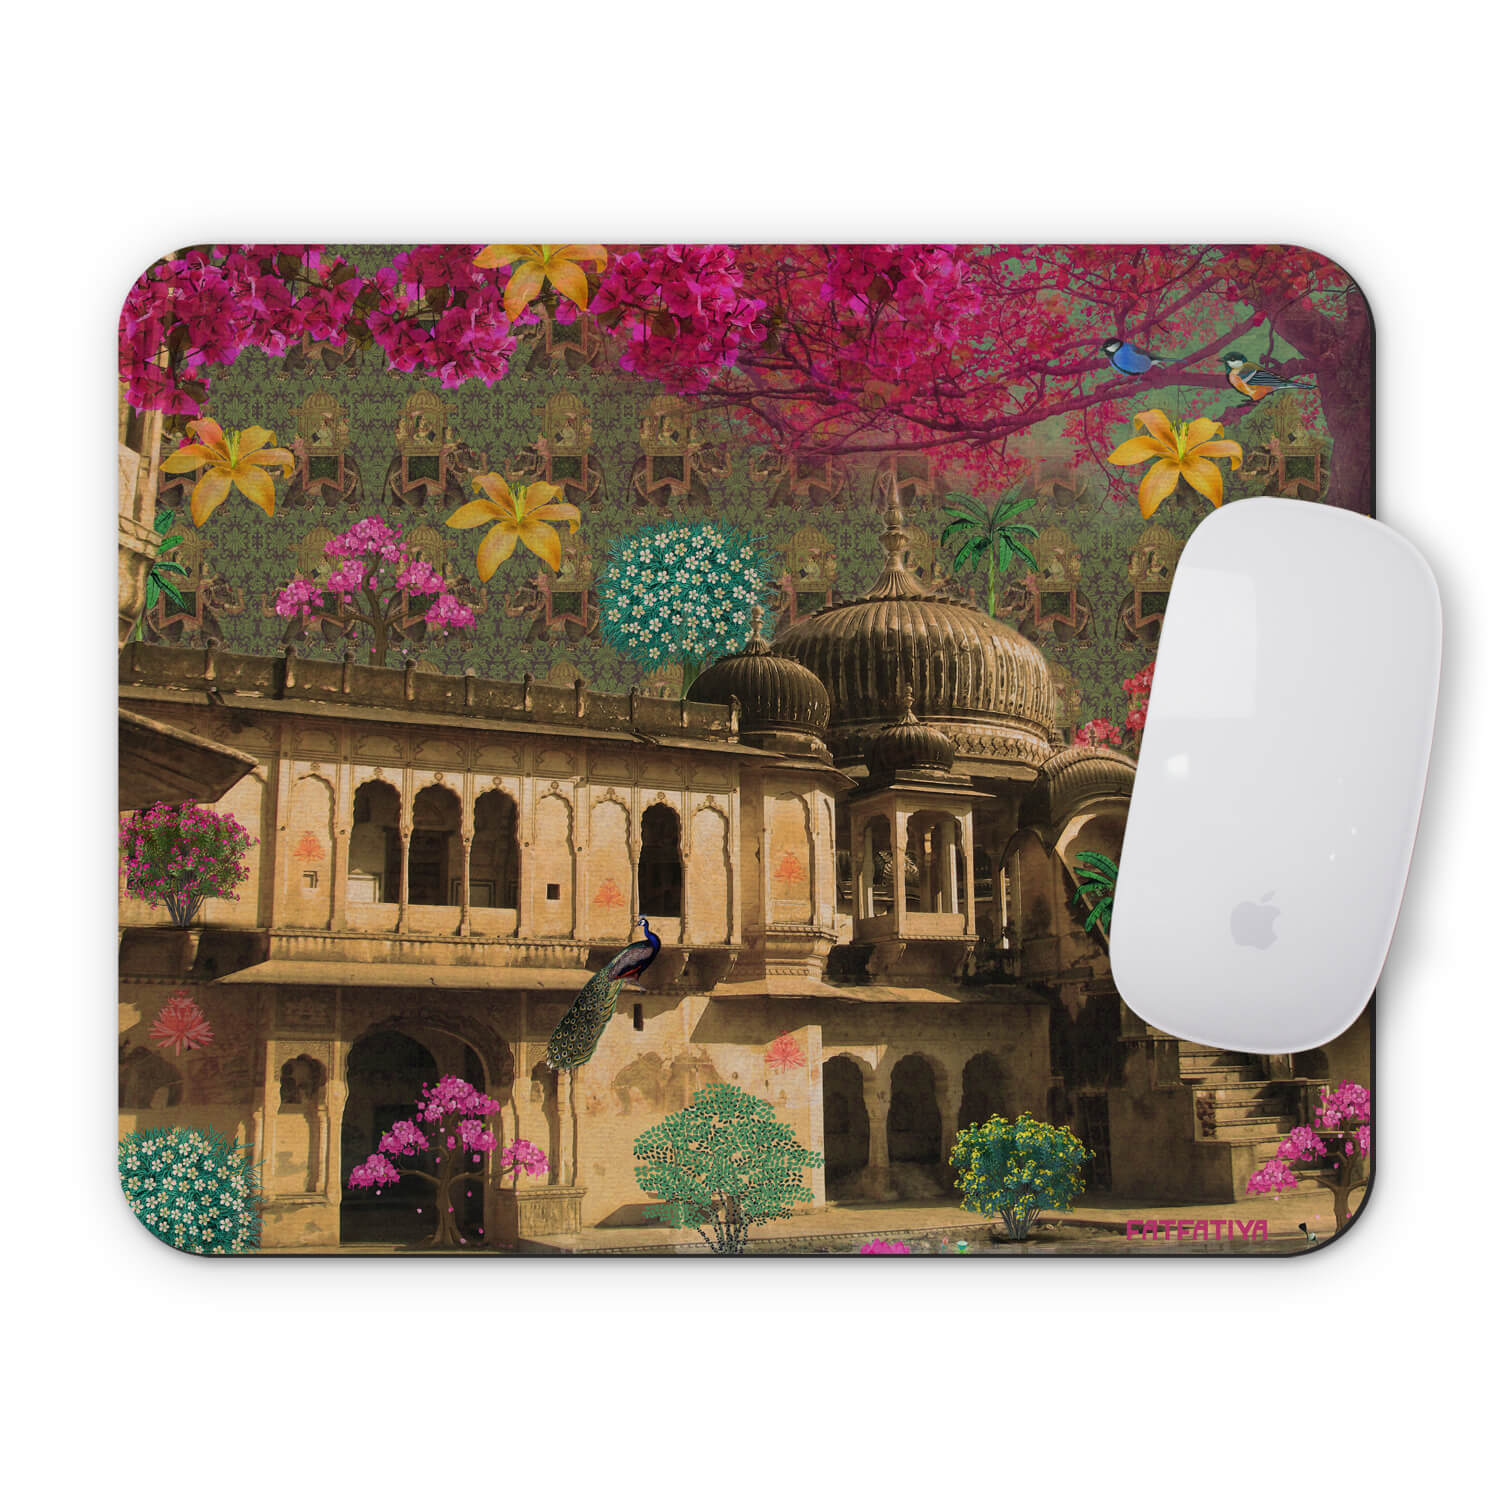 Buy Mouse Pads for Gifting